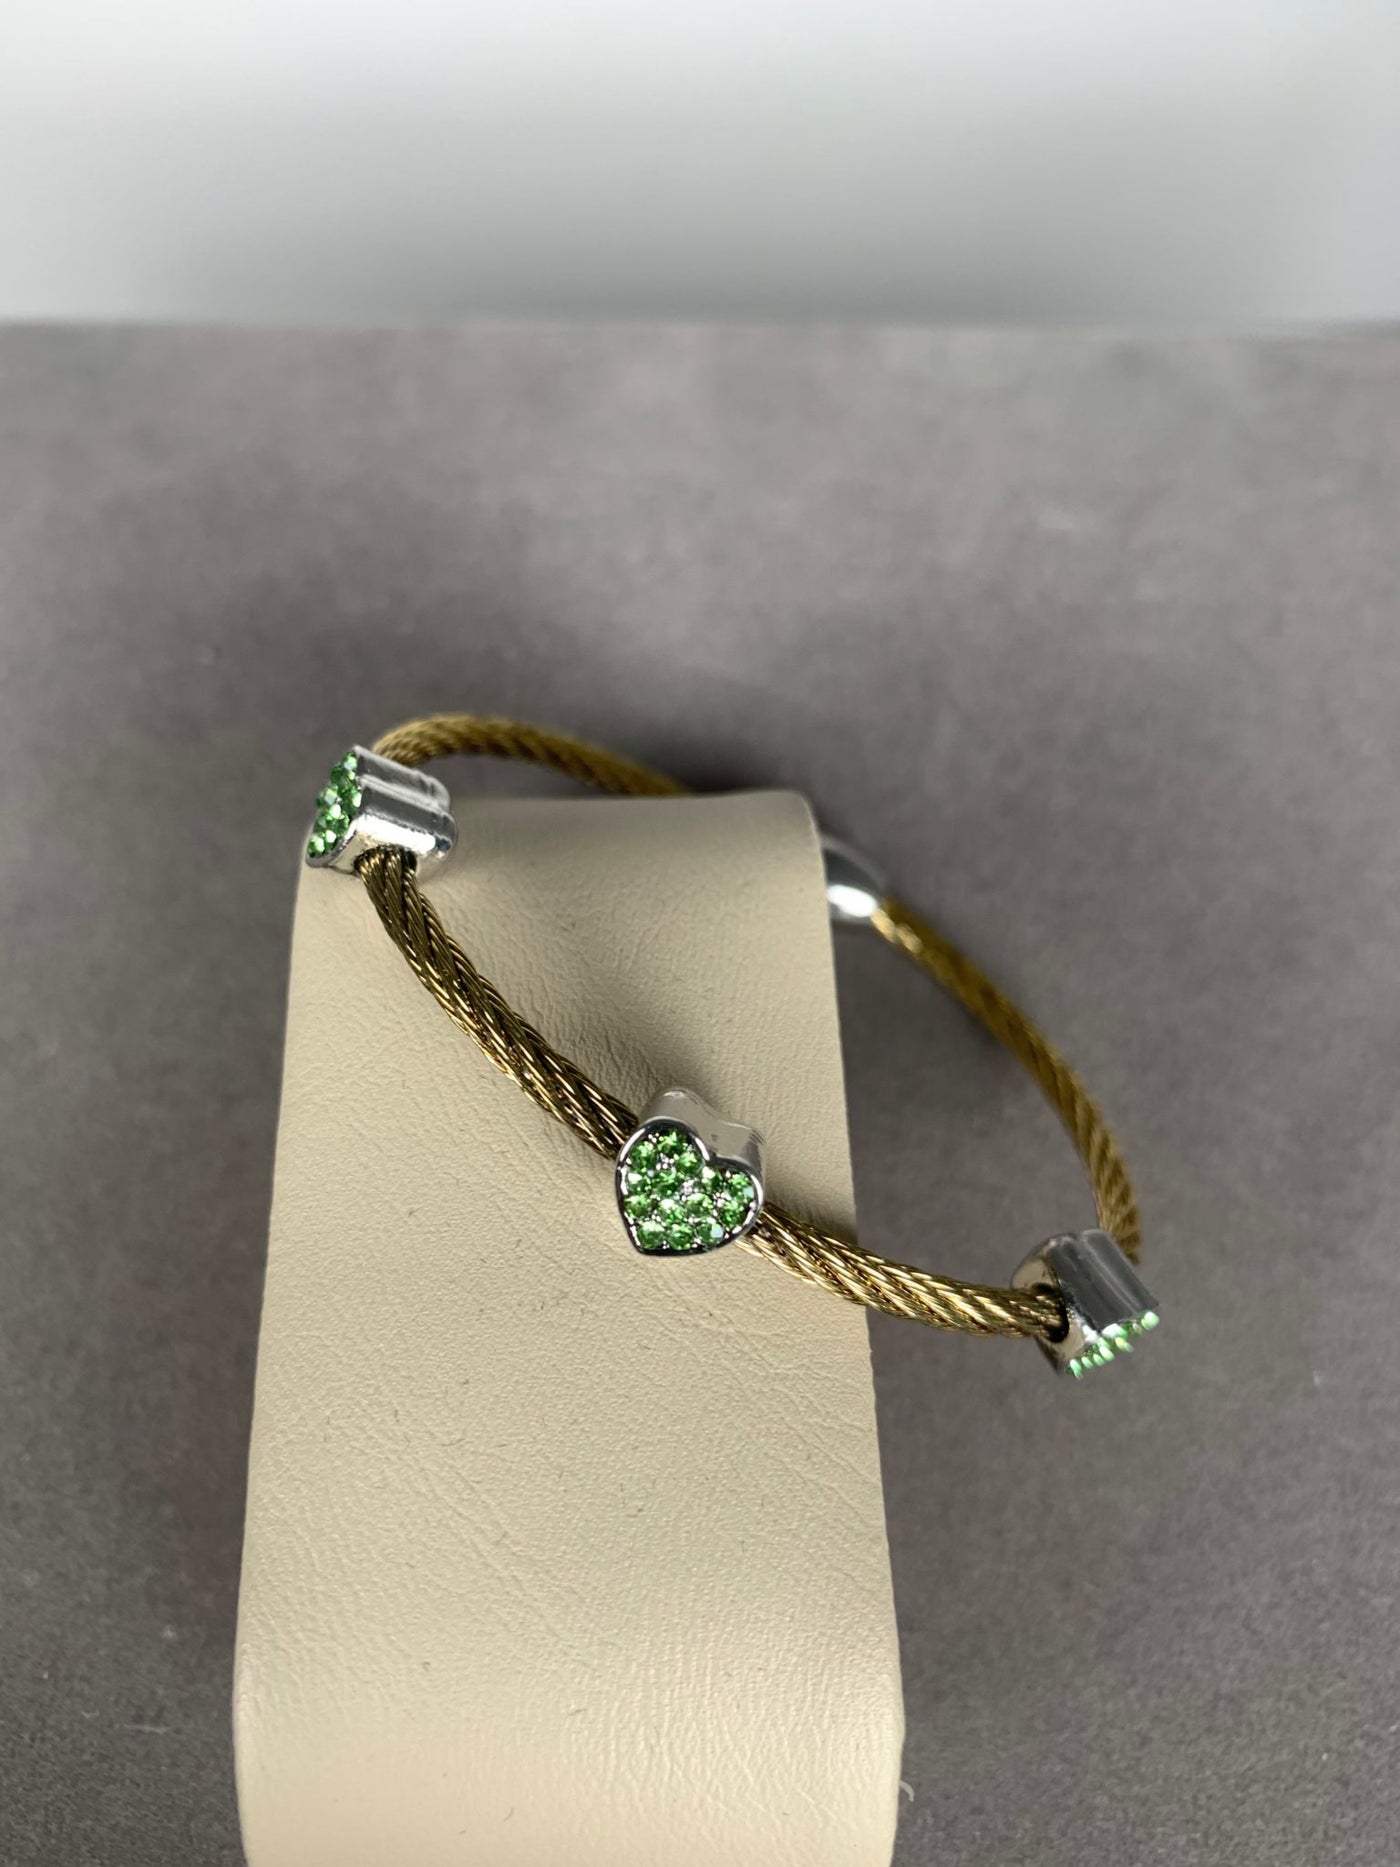 Yellow Gold Tone Wire Bangle Bracelet with 3 Green Crystal Heart Motifs